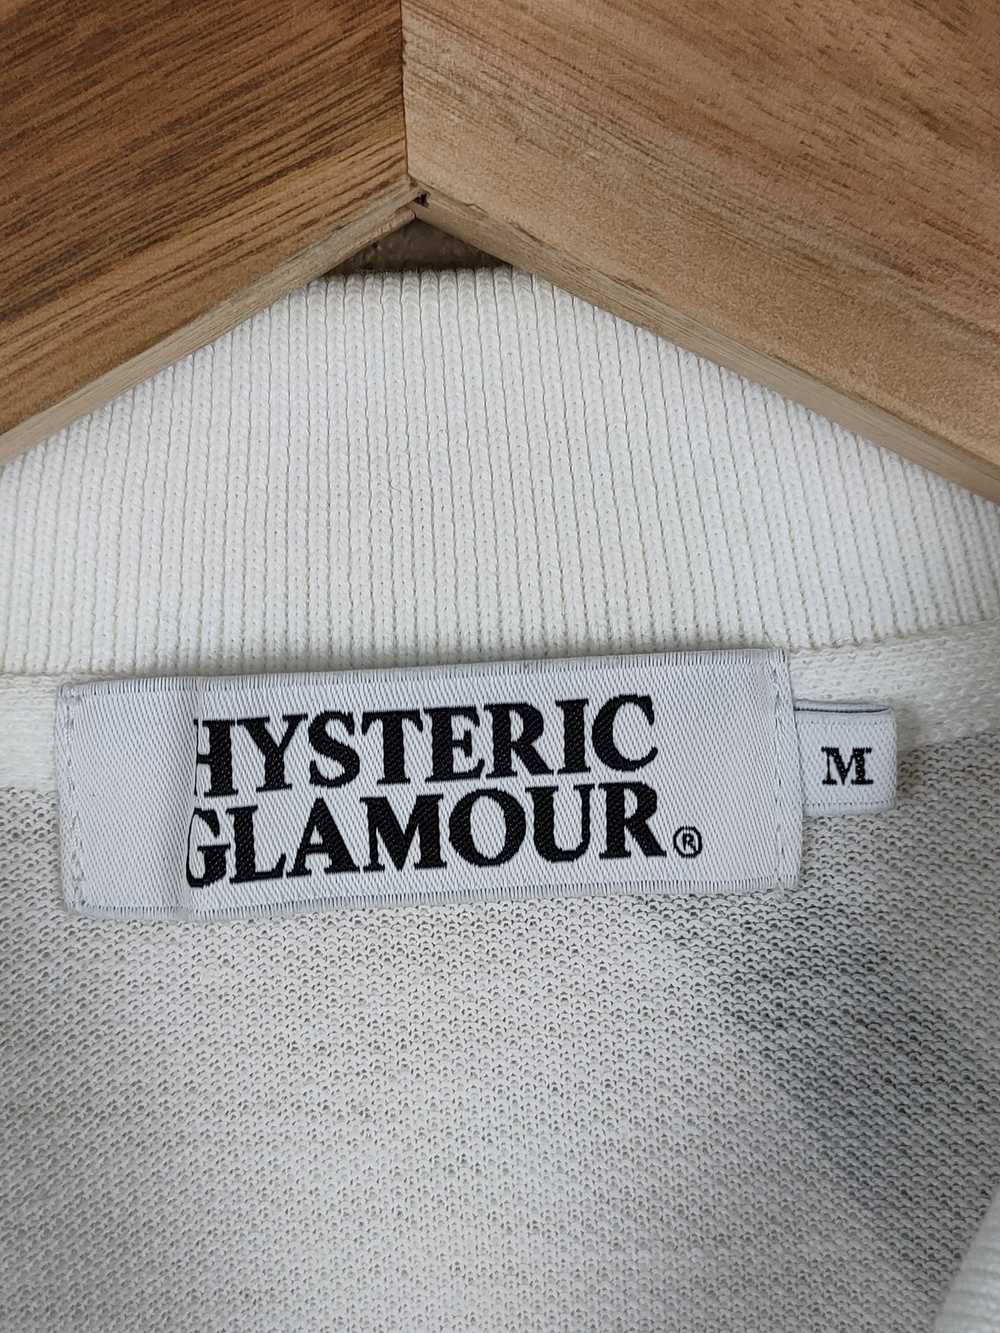 Hysteric Glamour × Japanese Brand Hysteric Glamou… - image 4